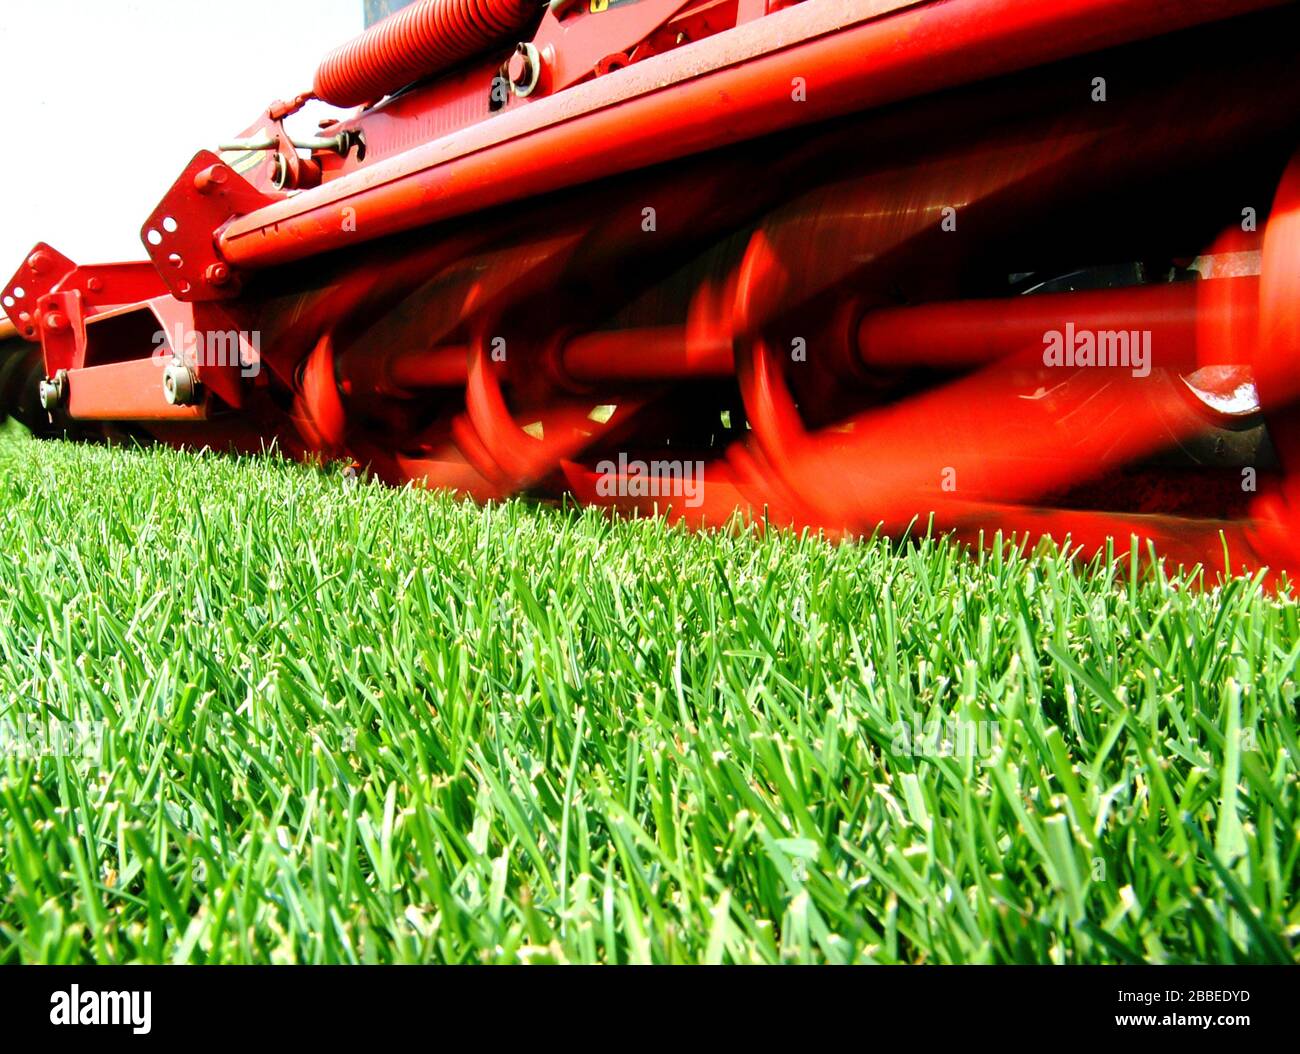 Grass production for football stadiums, cutting phase Stock Photo